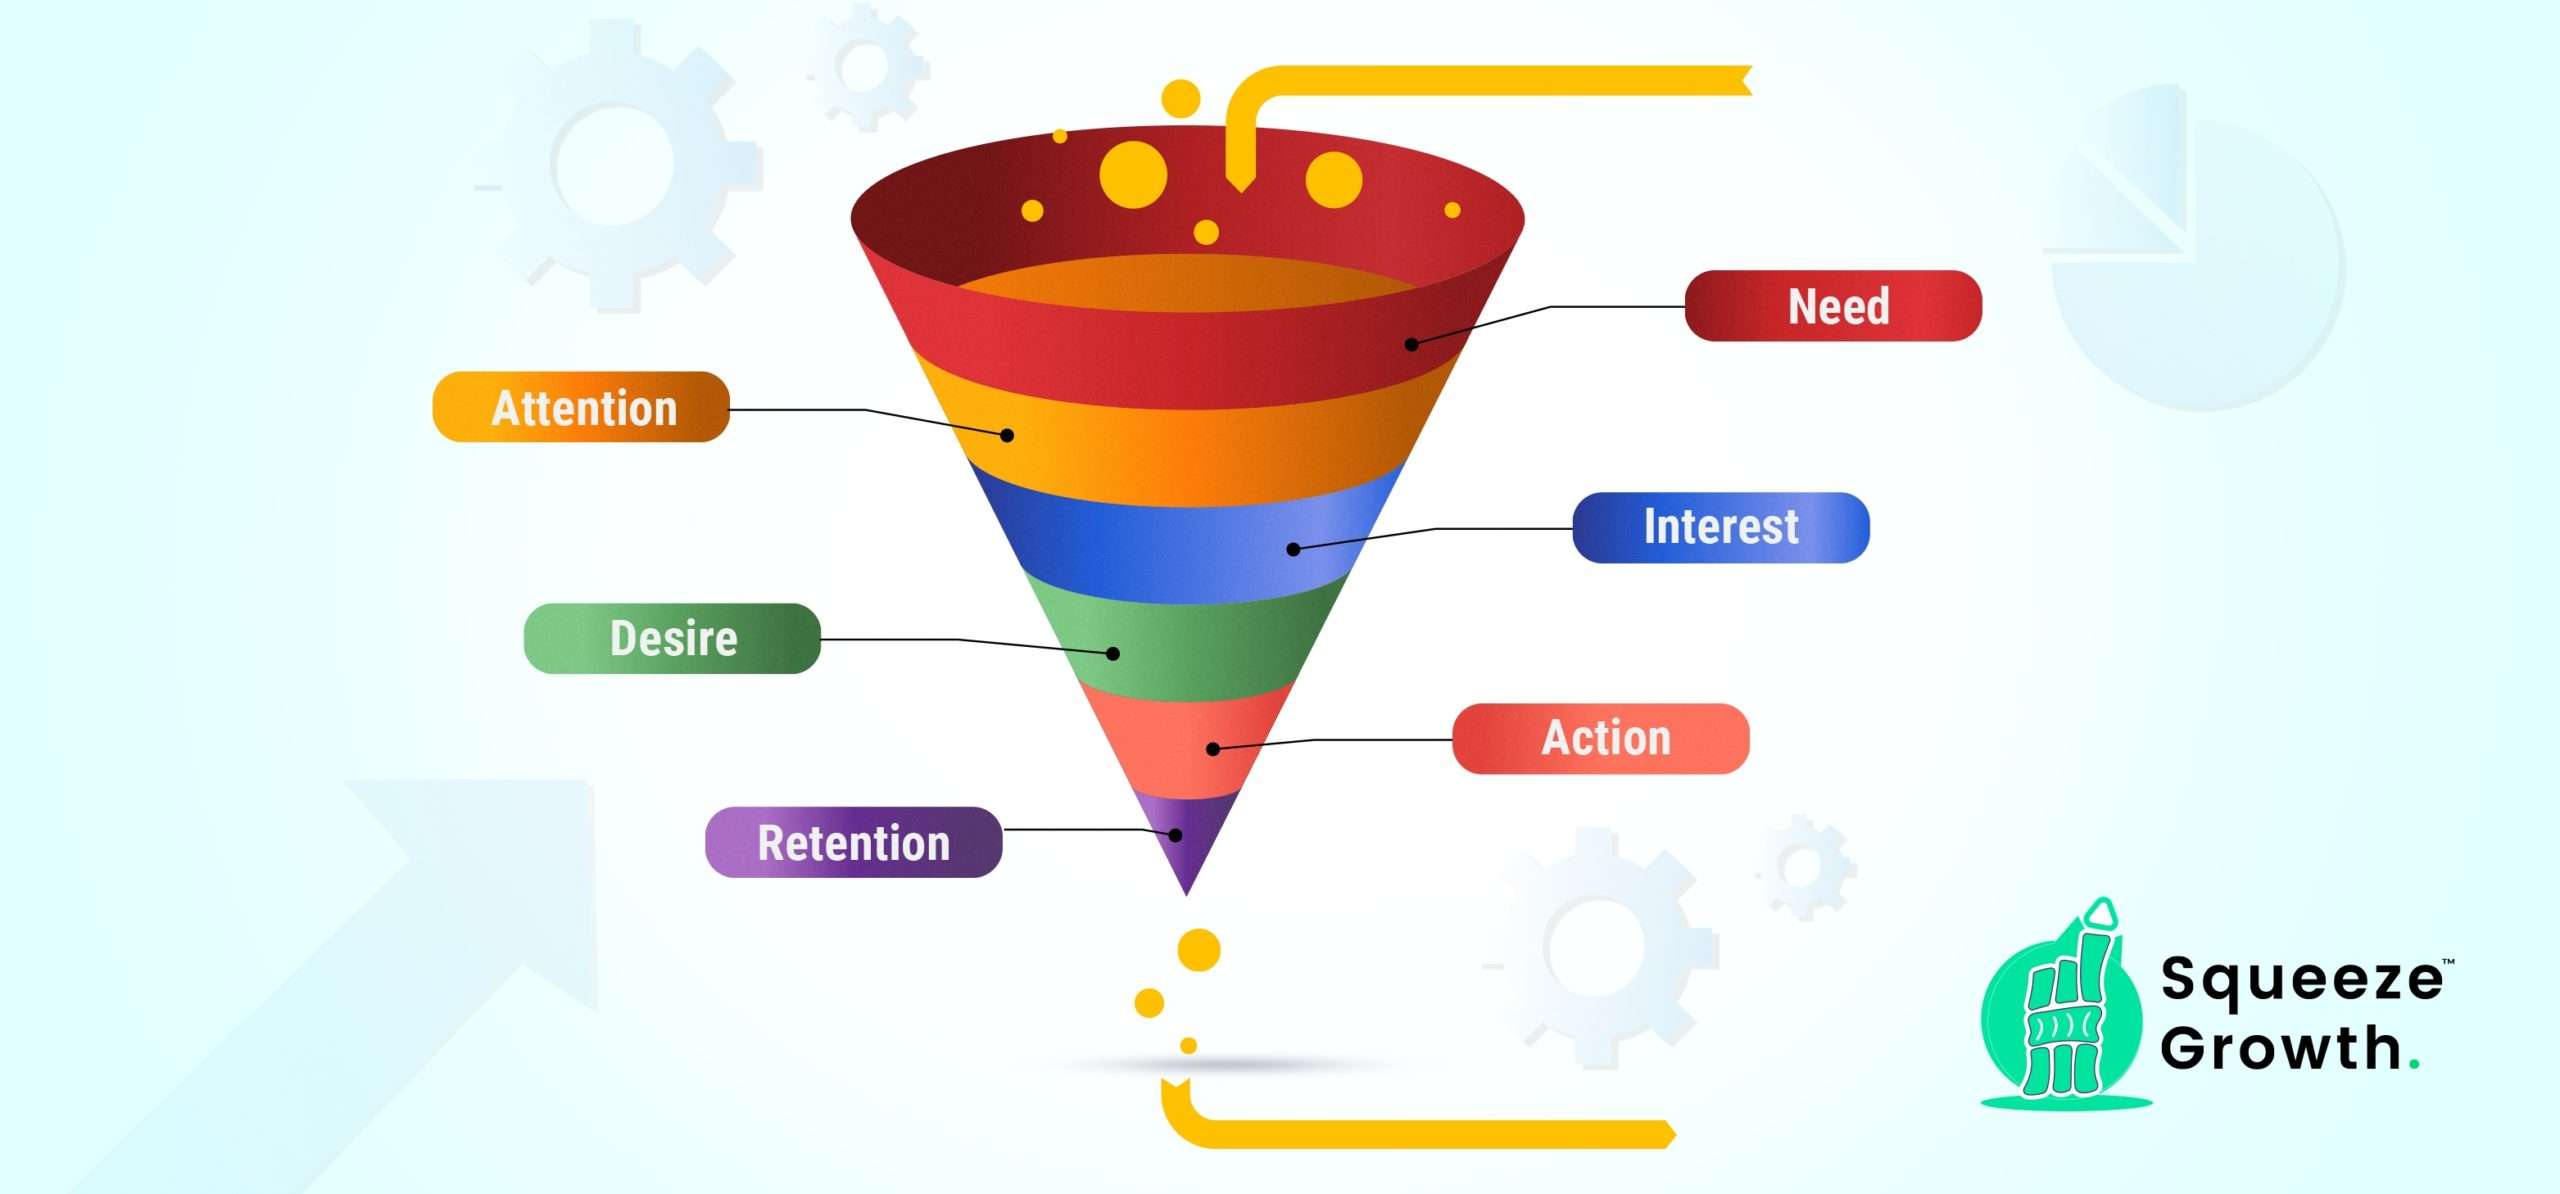 Modern Sales funnel illustration by SqueezeGrowth.com